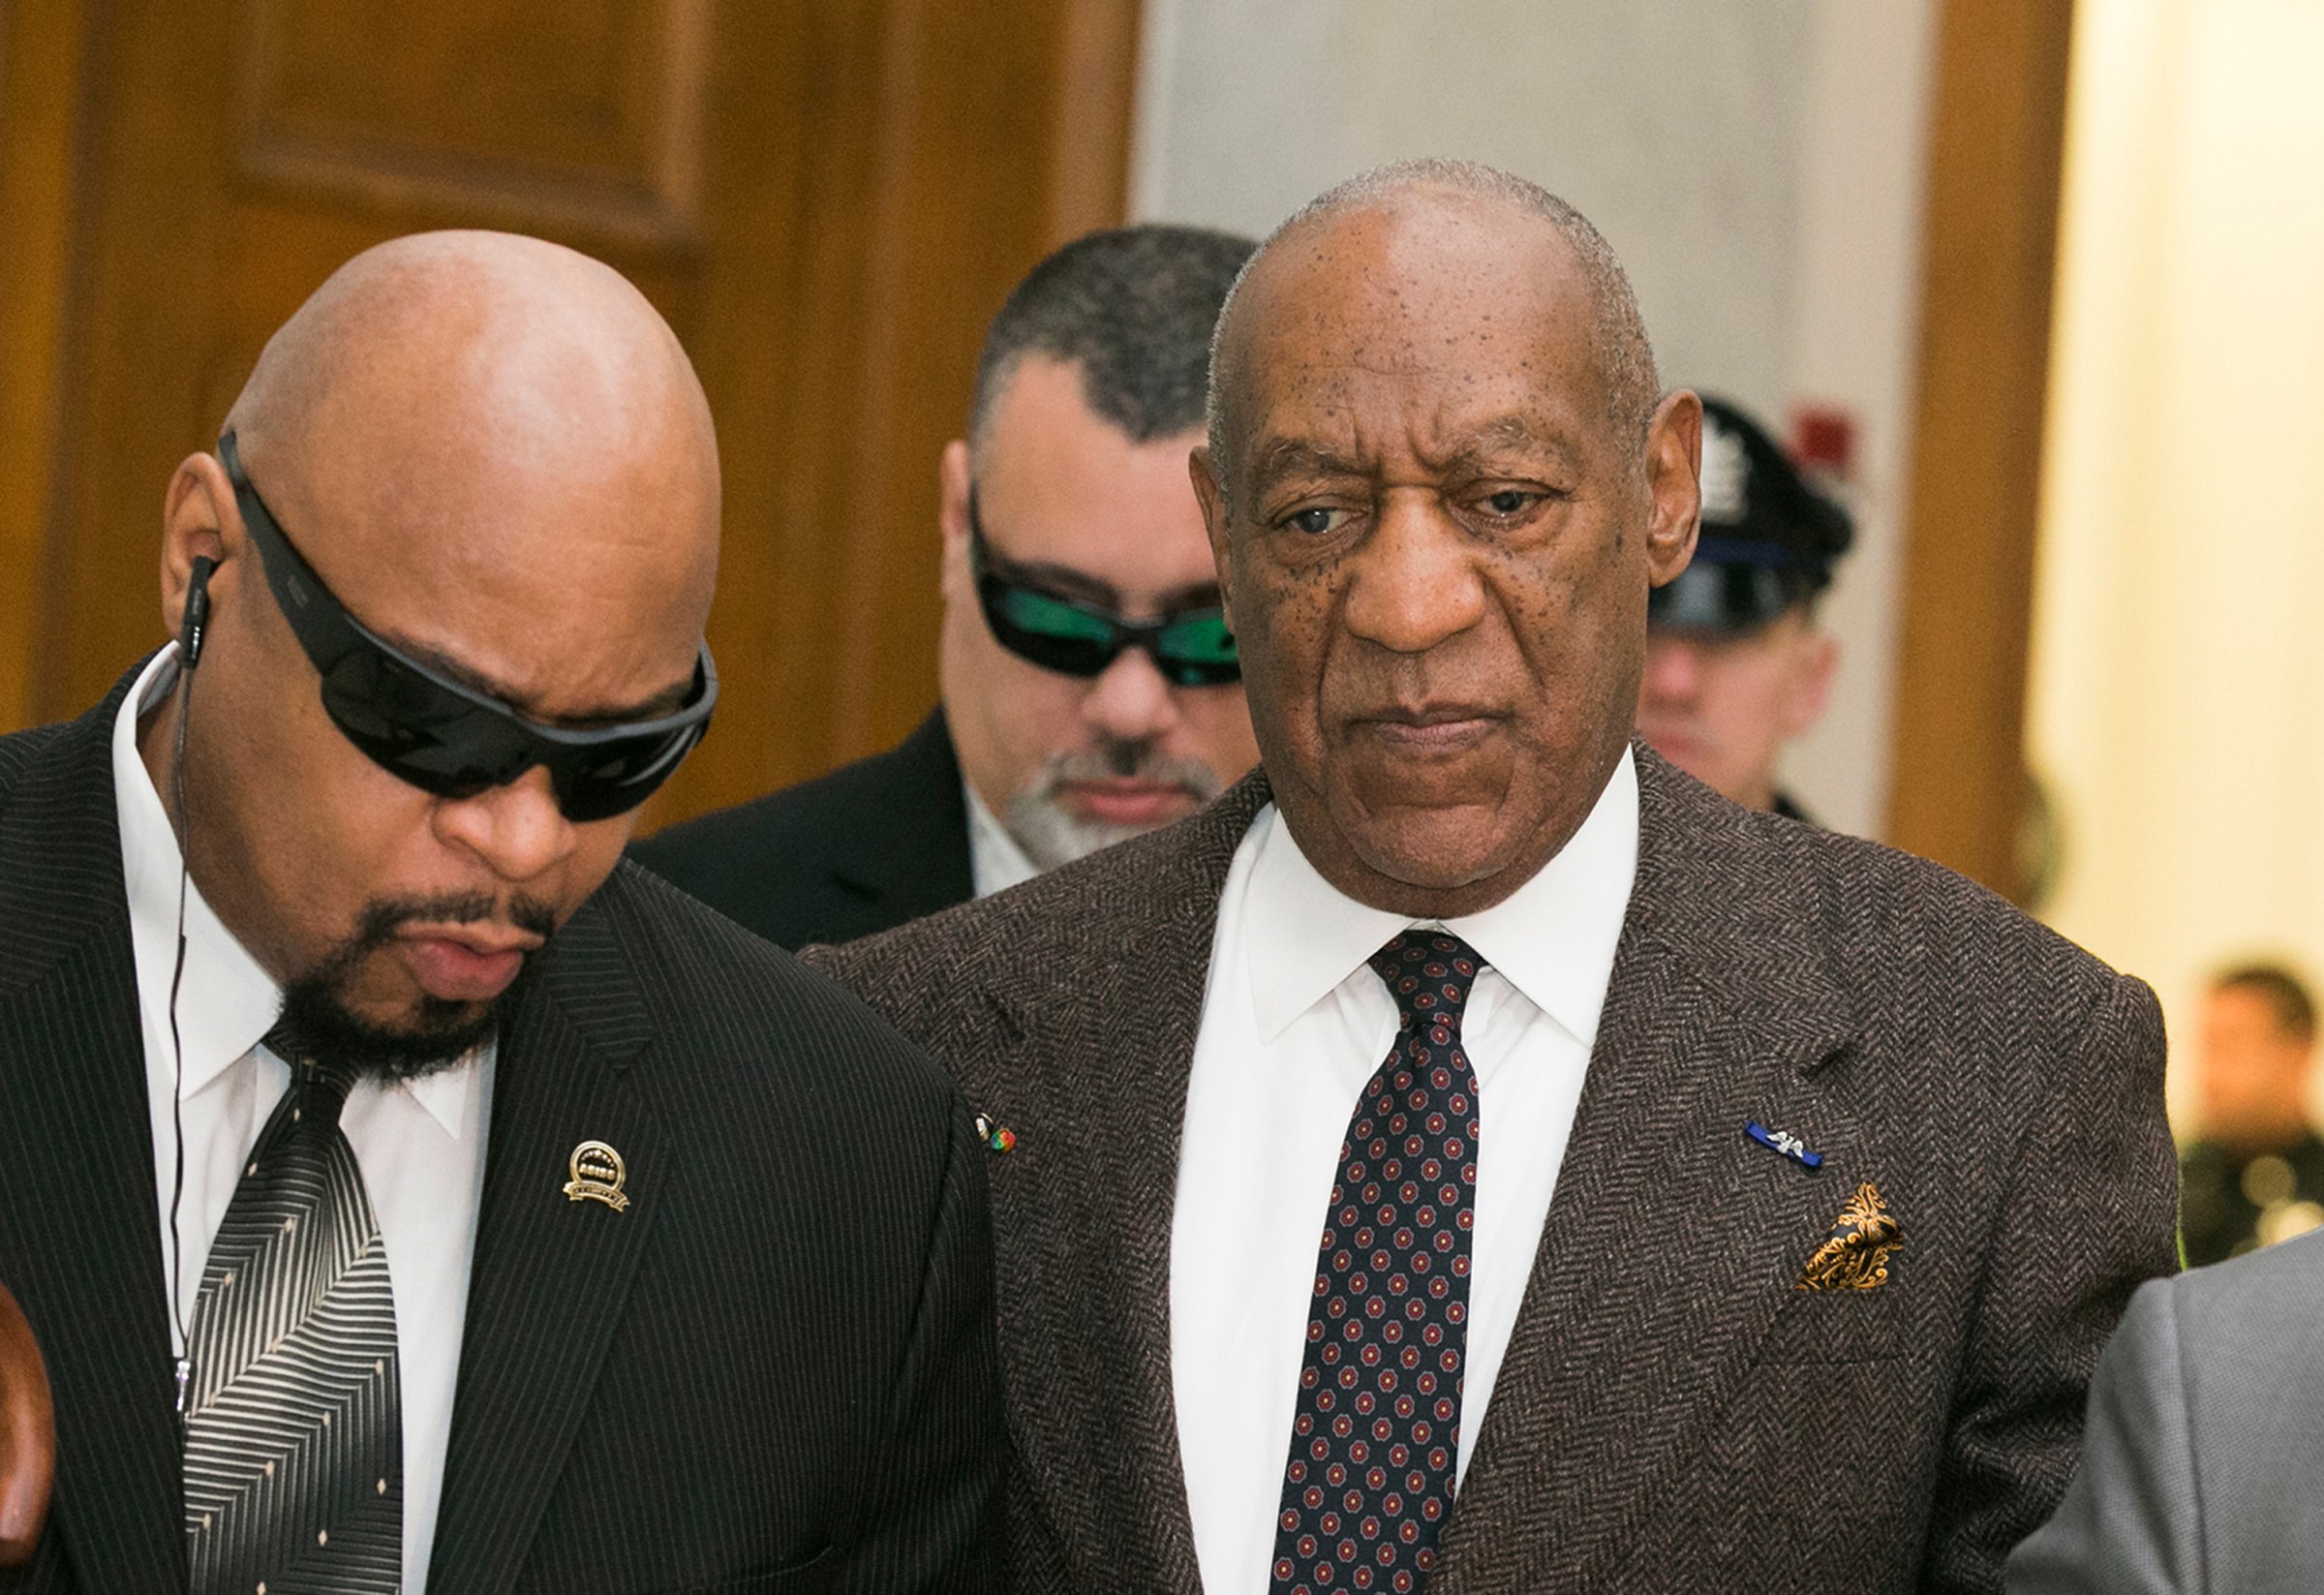 Bill Cosby arrives for the second day of hearings at the Montgomery County Courthouse in Norristown, Penn., on Feb. 3, 2016.